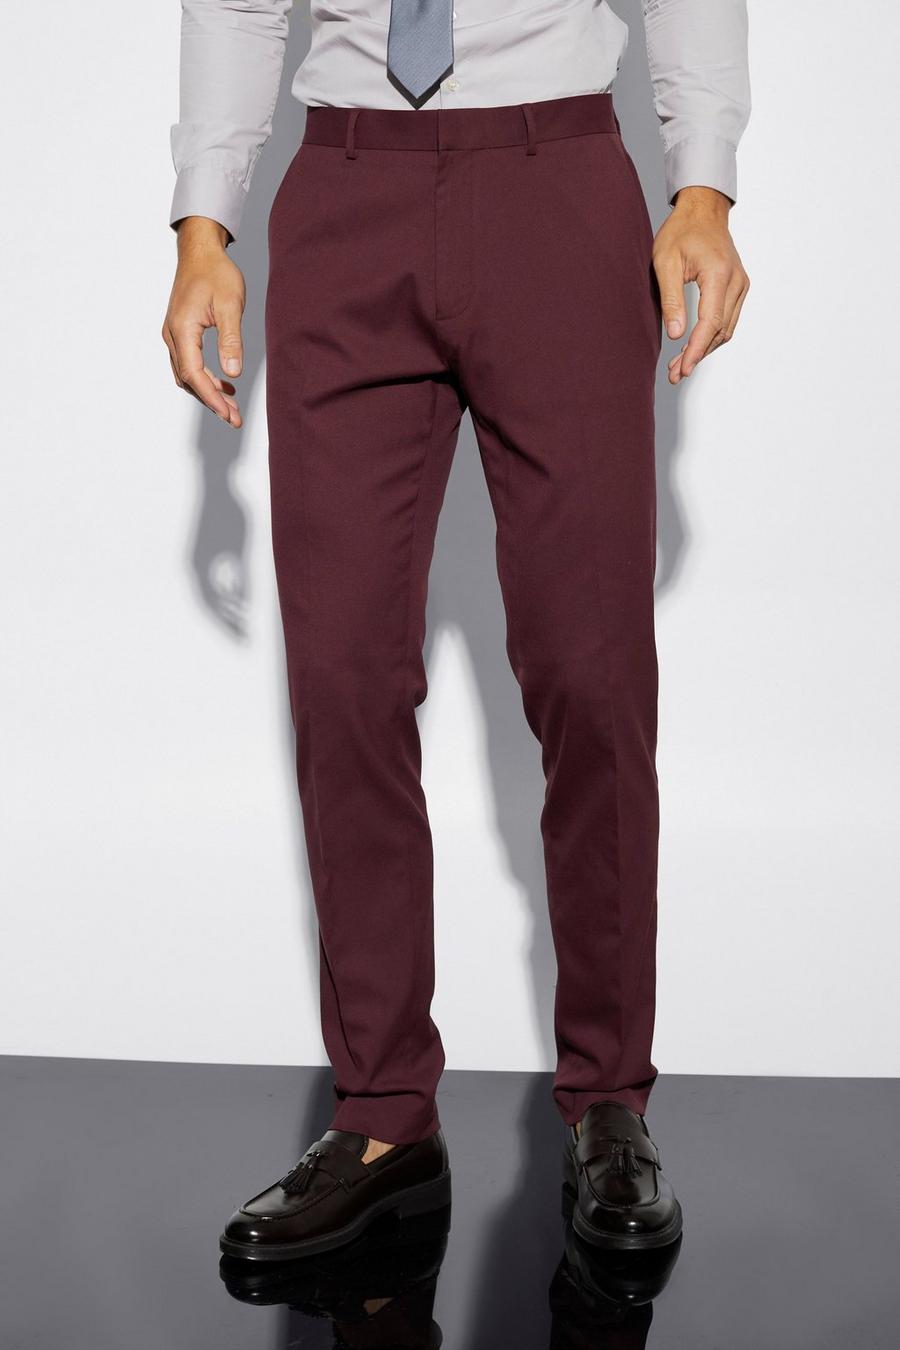 Burgundy red Tall Slim Fit Tailored Trouser